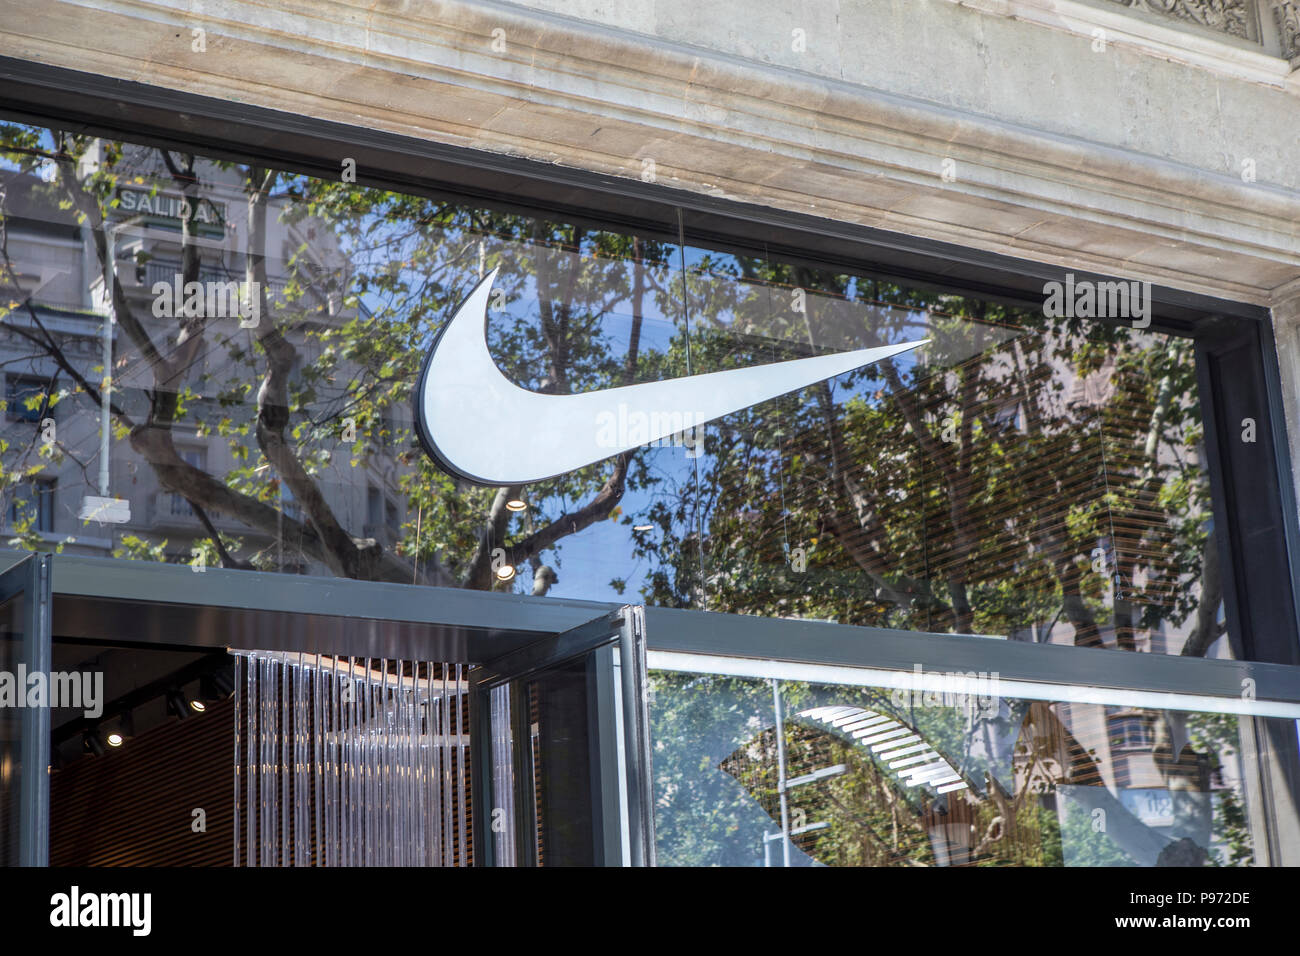 Nike sign on Passeig de Gràcia street in Barcelona. Barcelona is a city in  Spain. It is the capital and largest city of Catalonia, as well as the  second most populous municipality